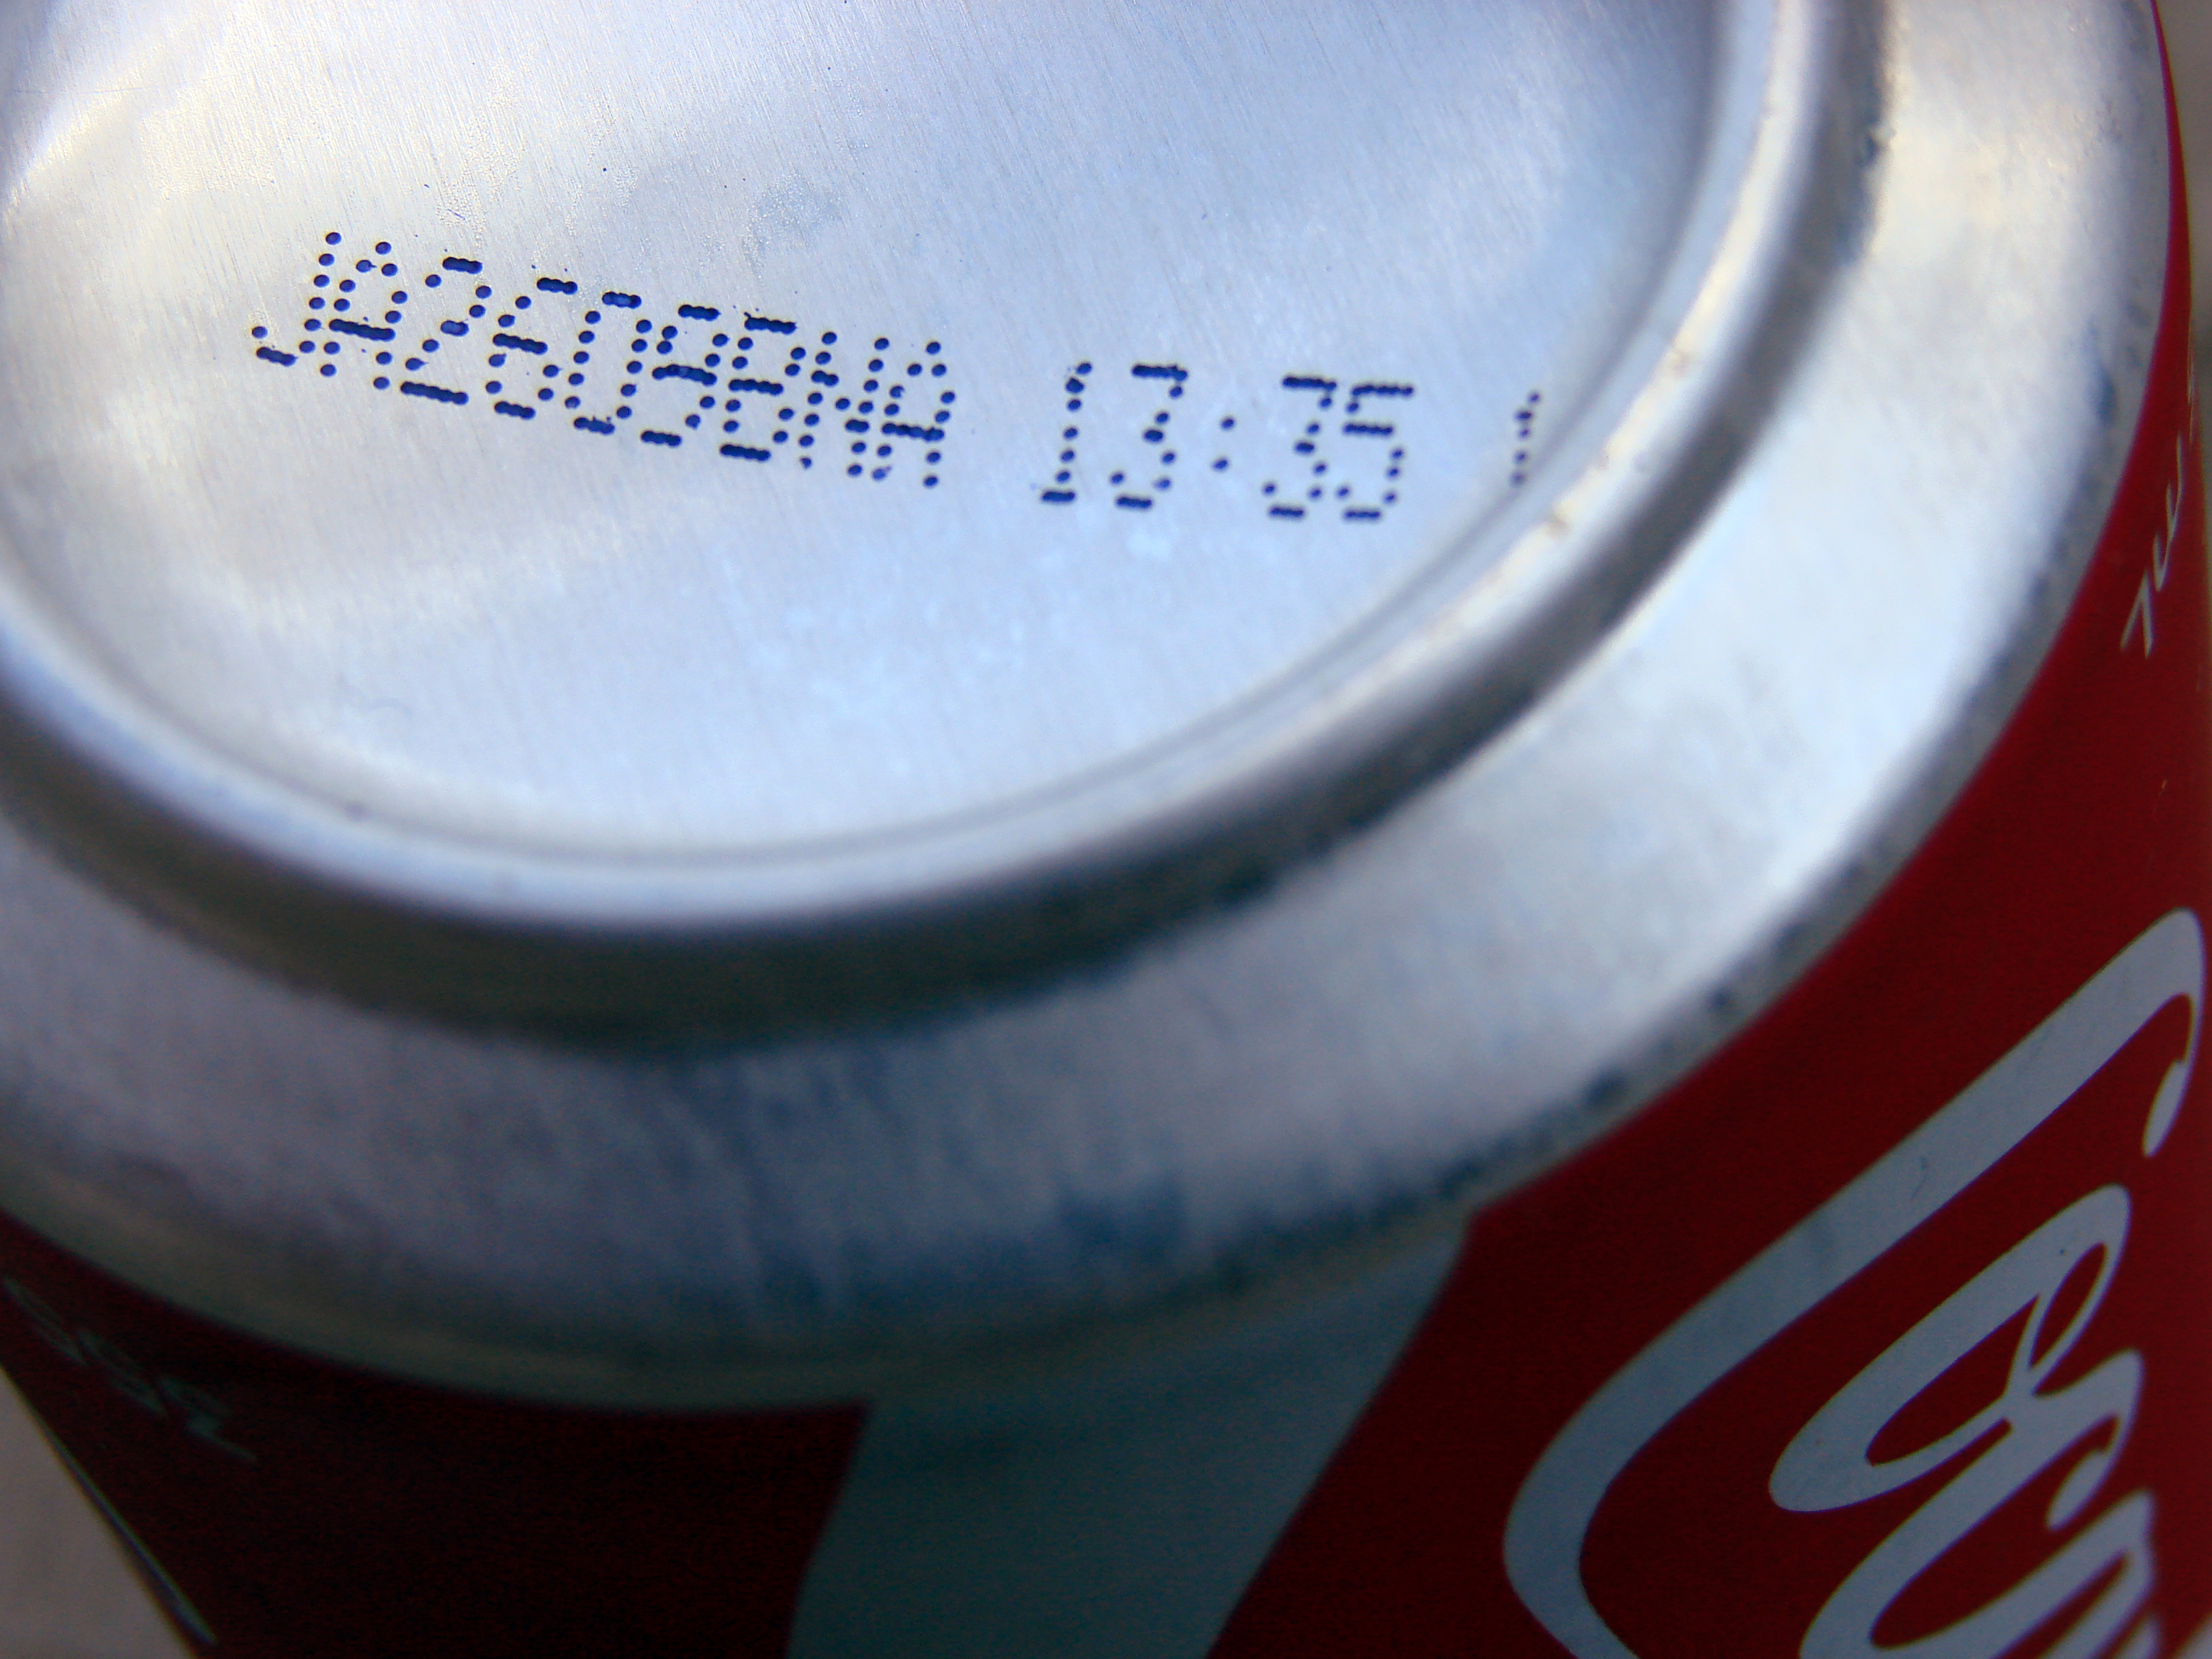 Date Coke becomes clear and salty